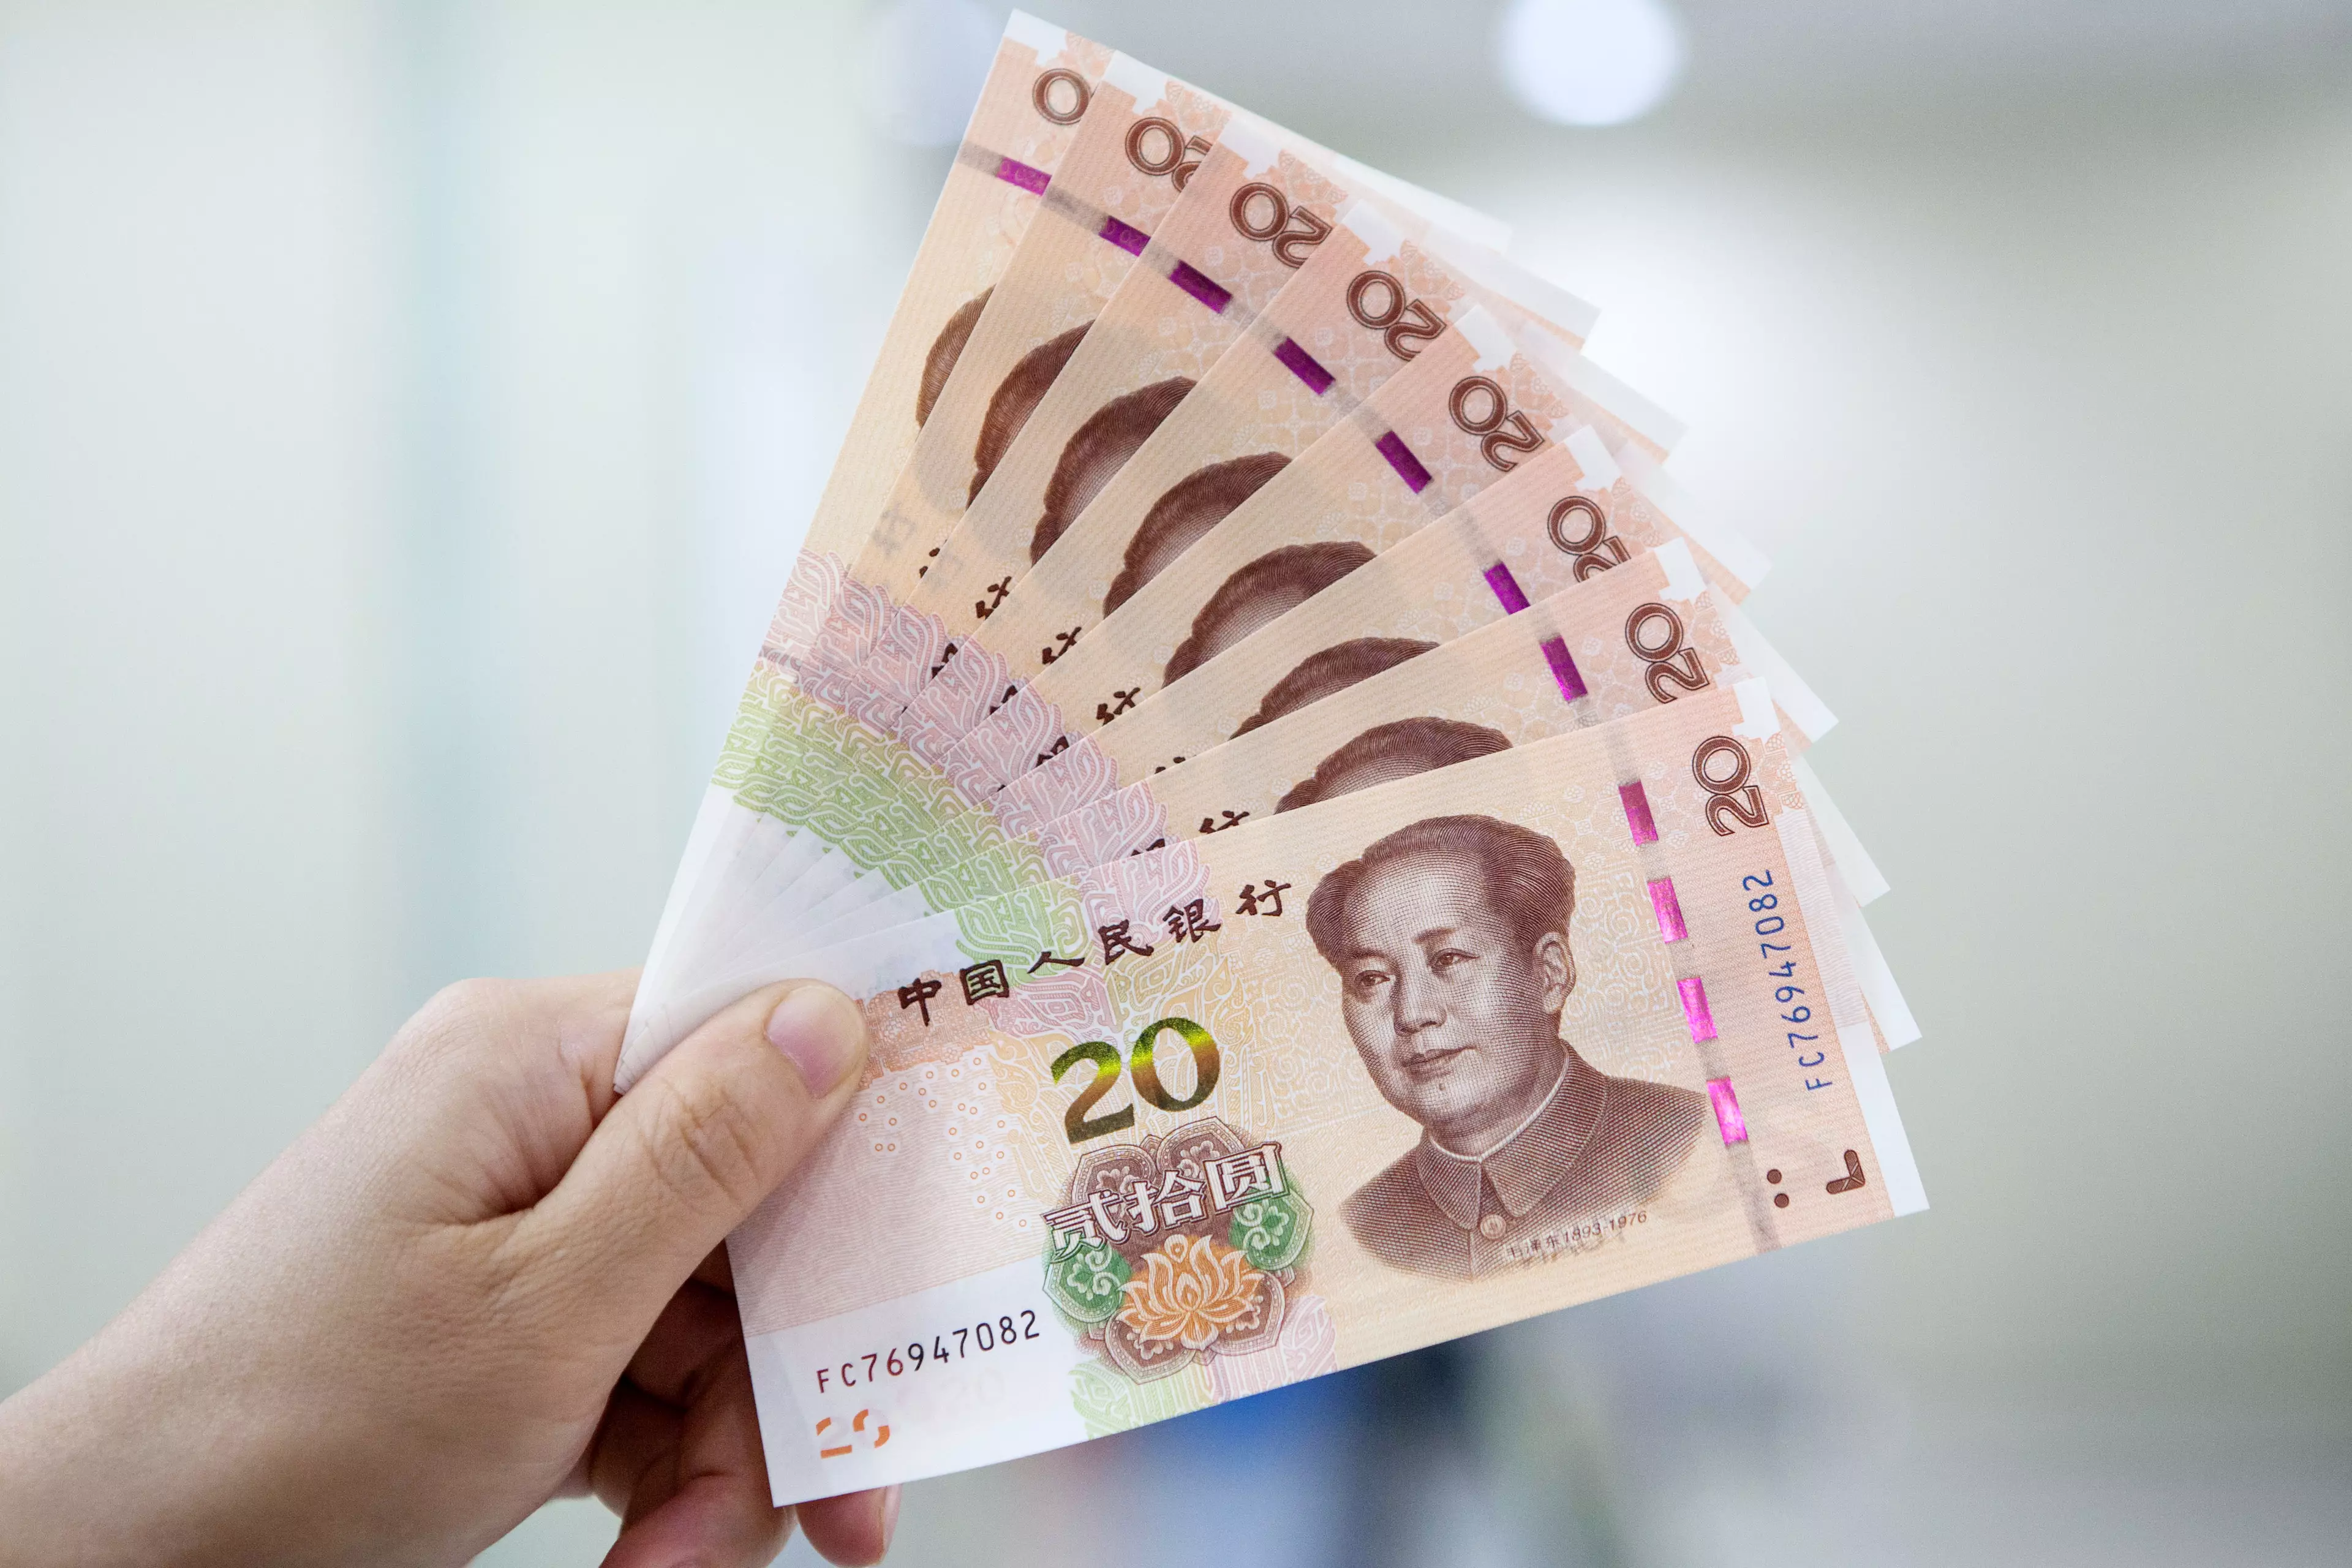 Another woman microwaved some Chinese bank notes to ensure they were free of Covid-19.